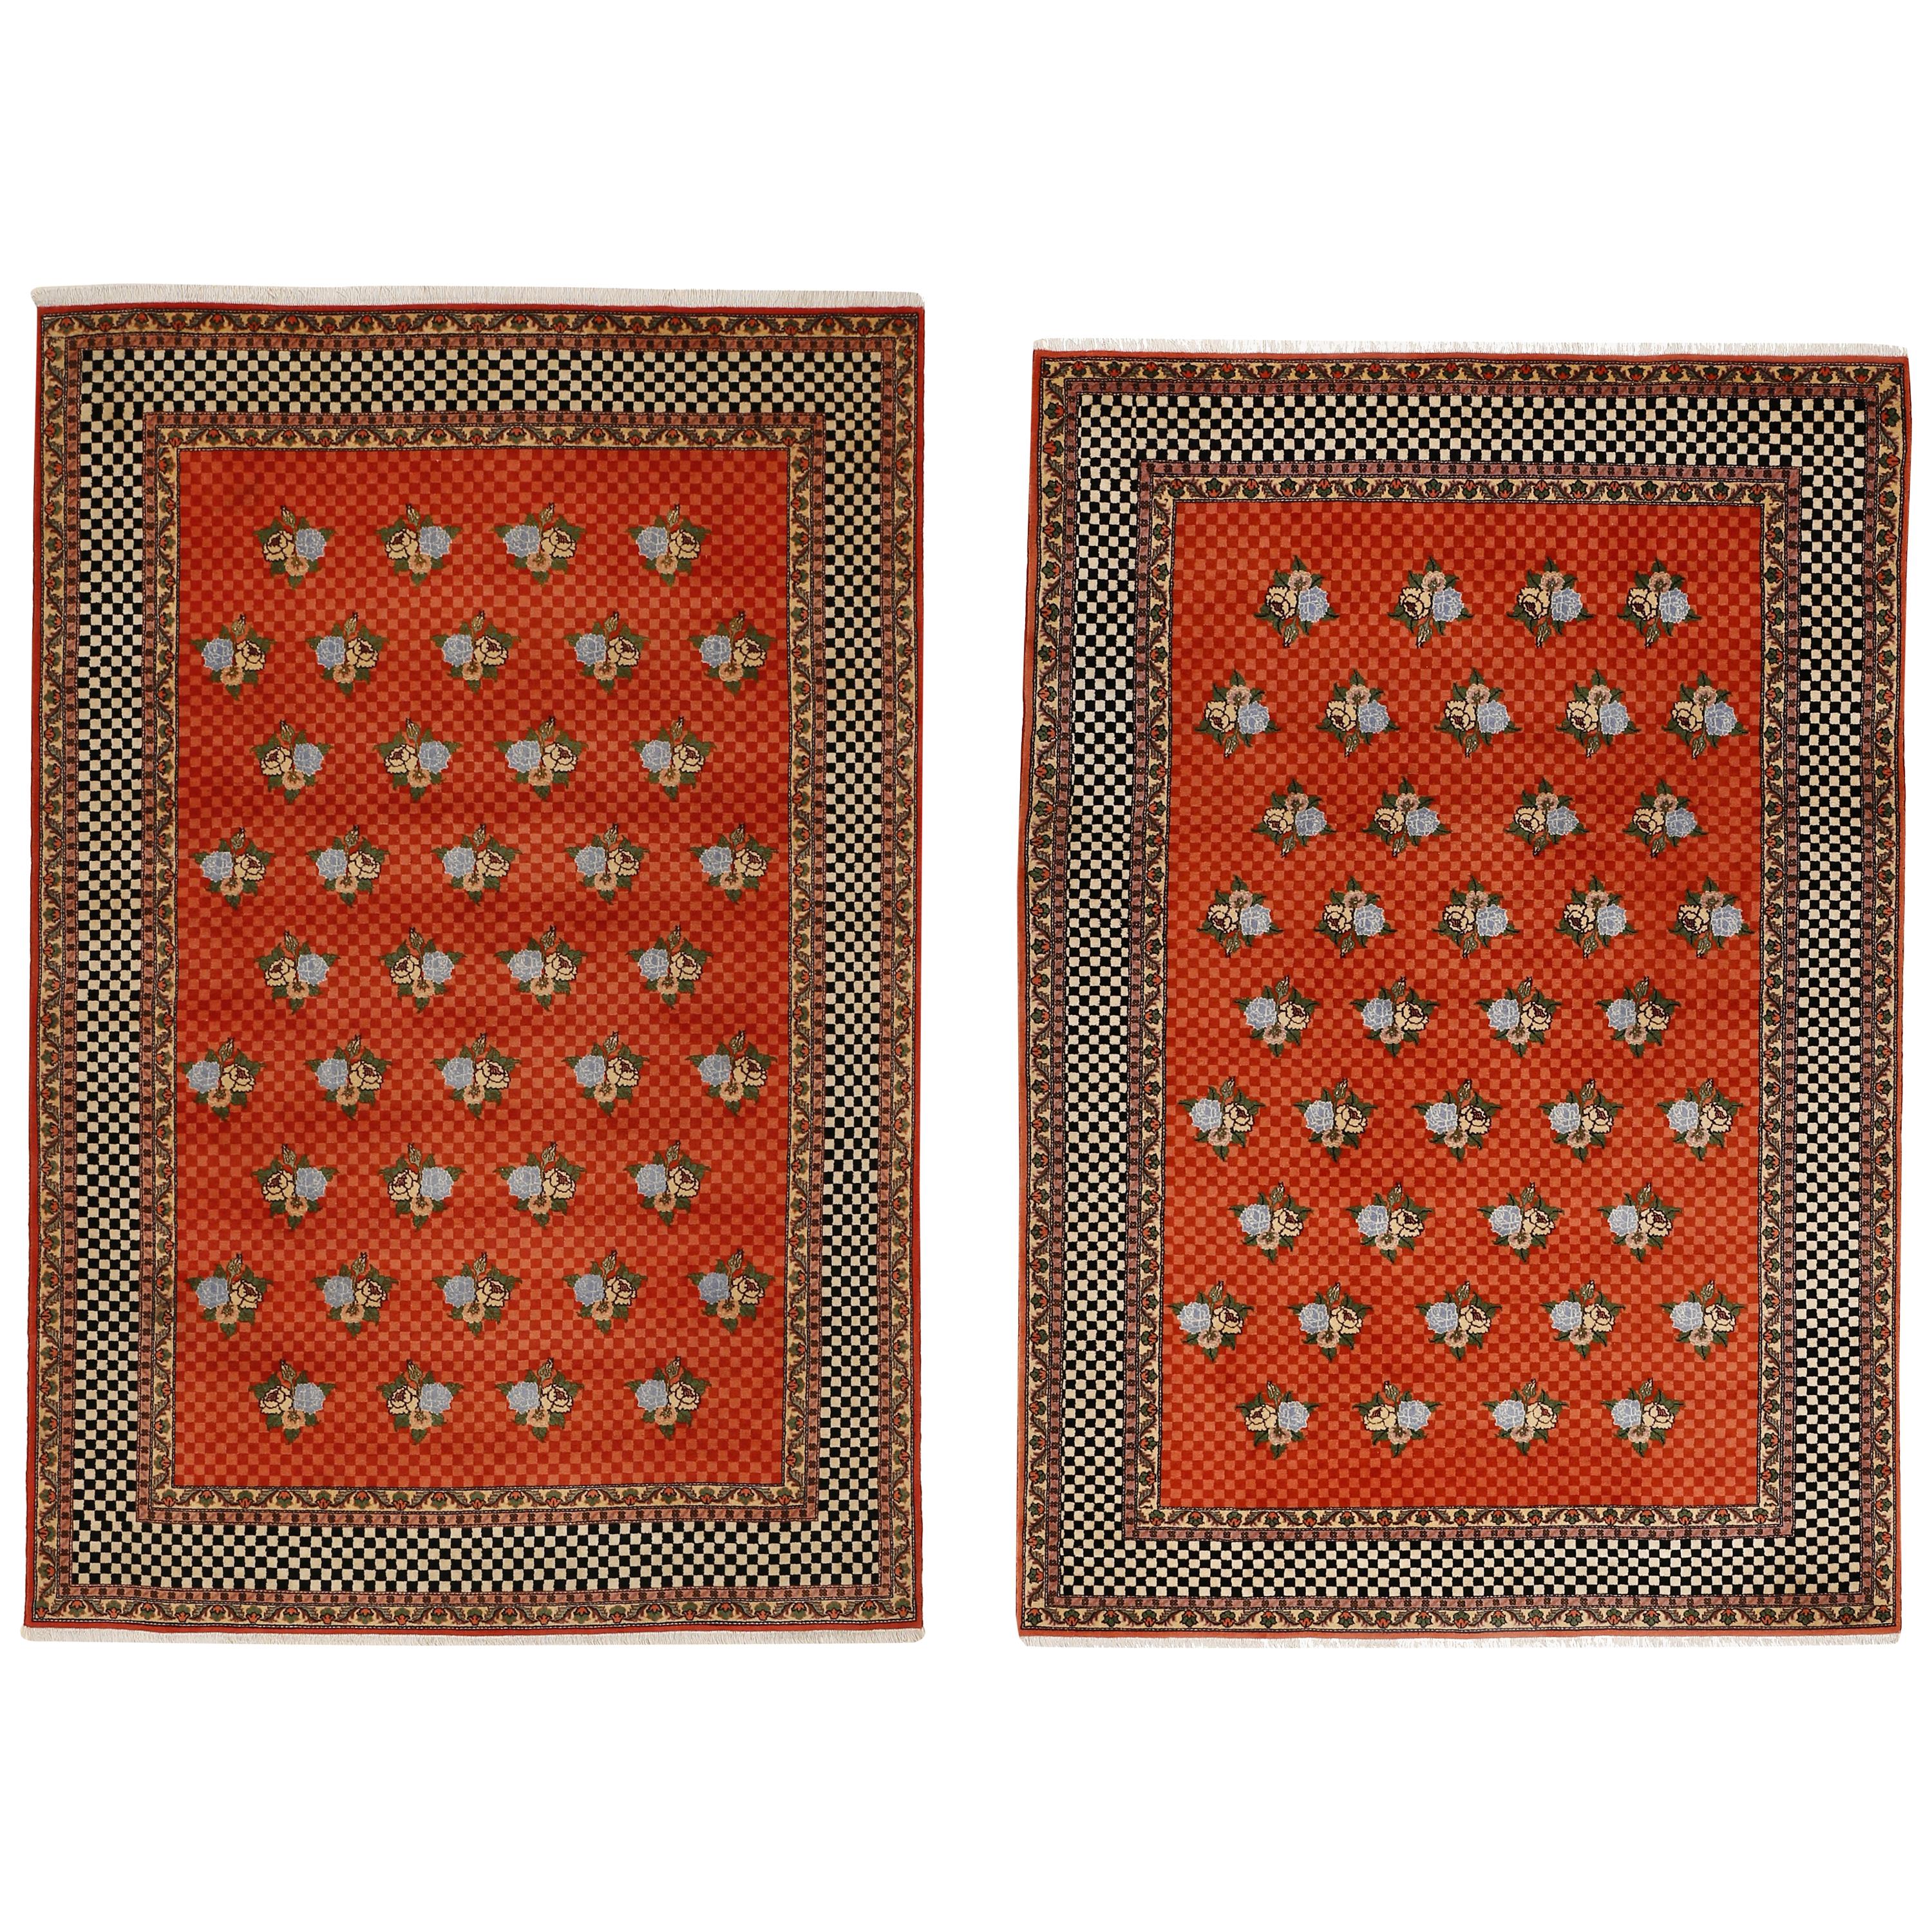 Pair of Modernist Chequerboard Design Rugs